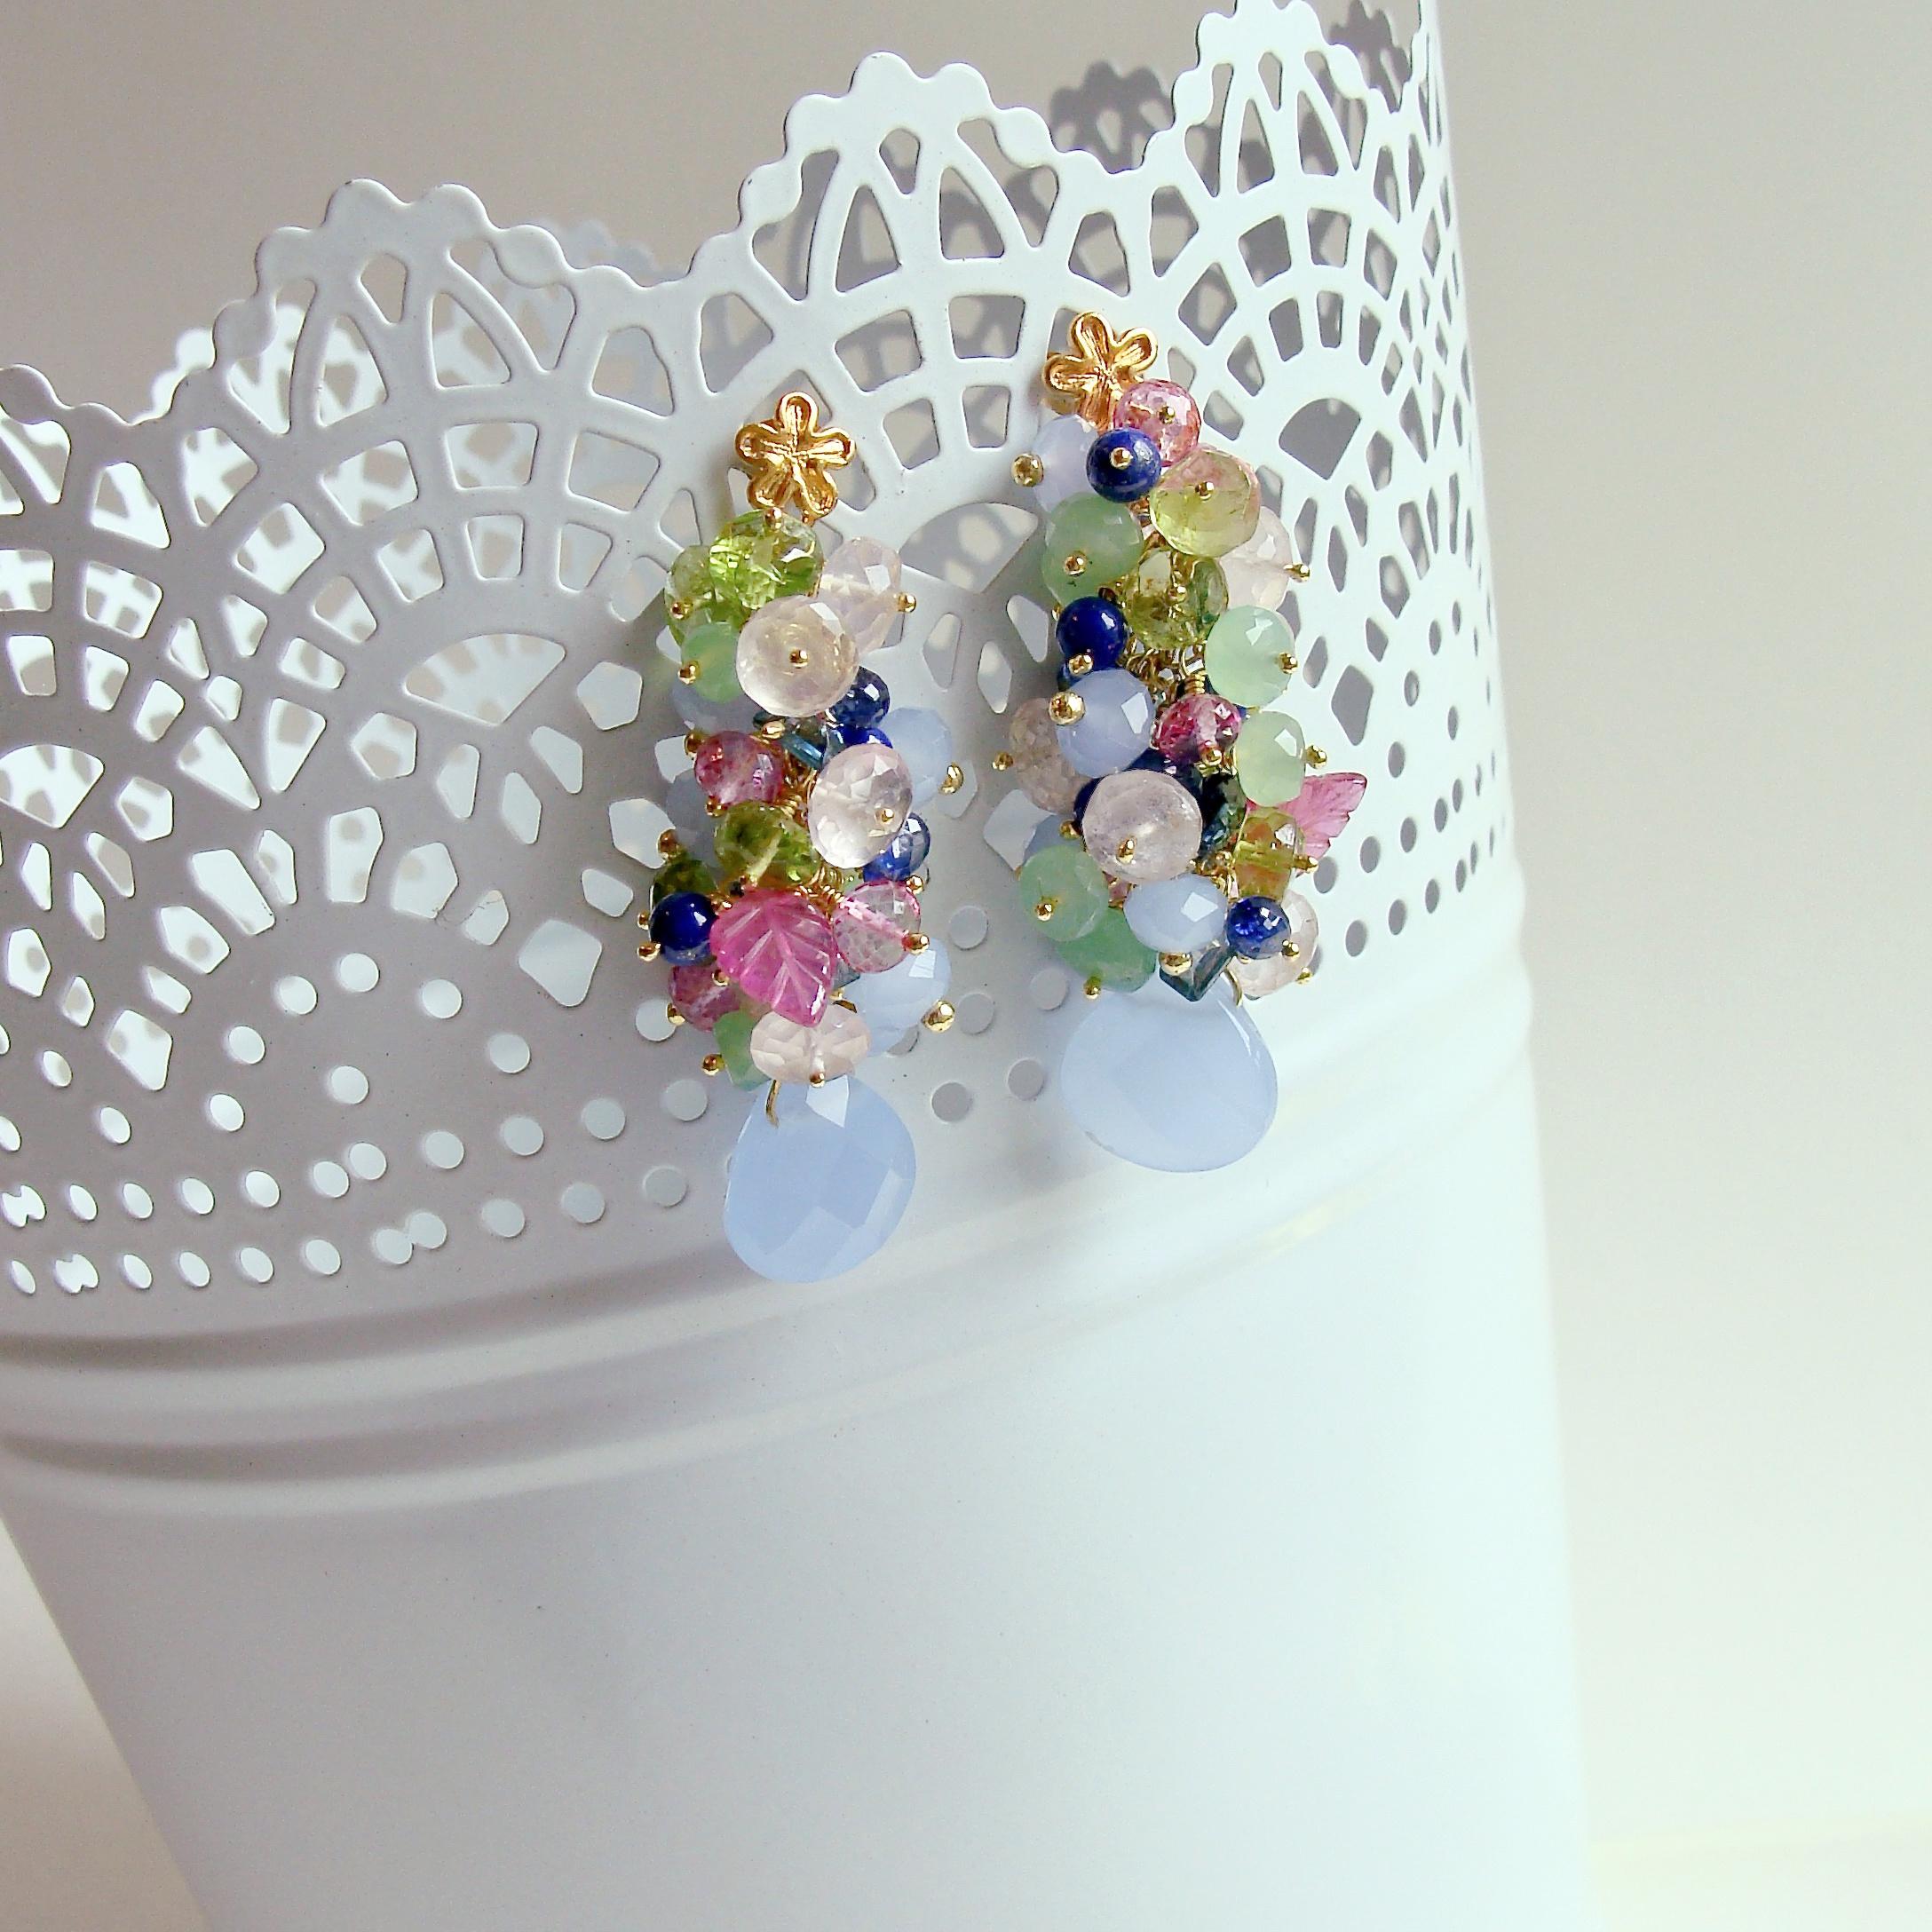 After this harsh and snowy winter, everyone is ready for the happy colors of spring and these perennial favorite earrings don’t disappoint. This riot of happy  gemstones mimics the beautiful colors found amongst the happy-faced Pansy flowers of